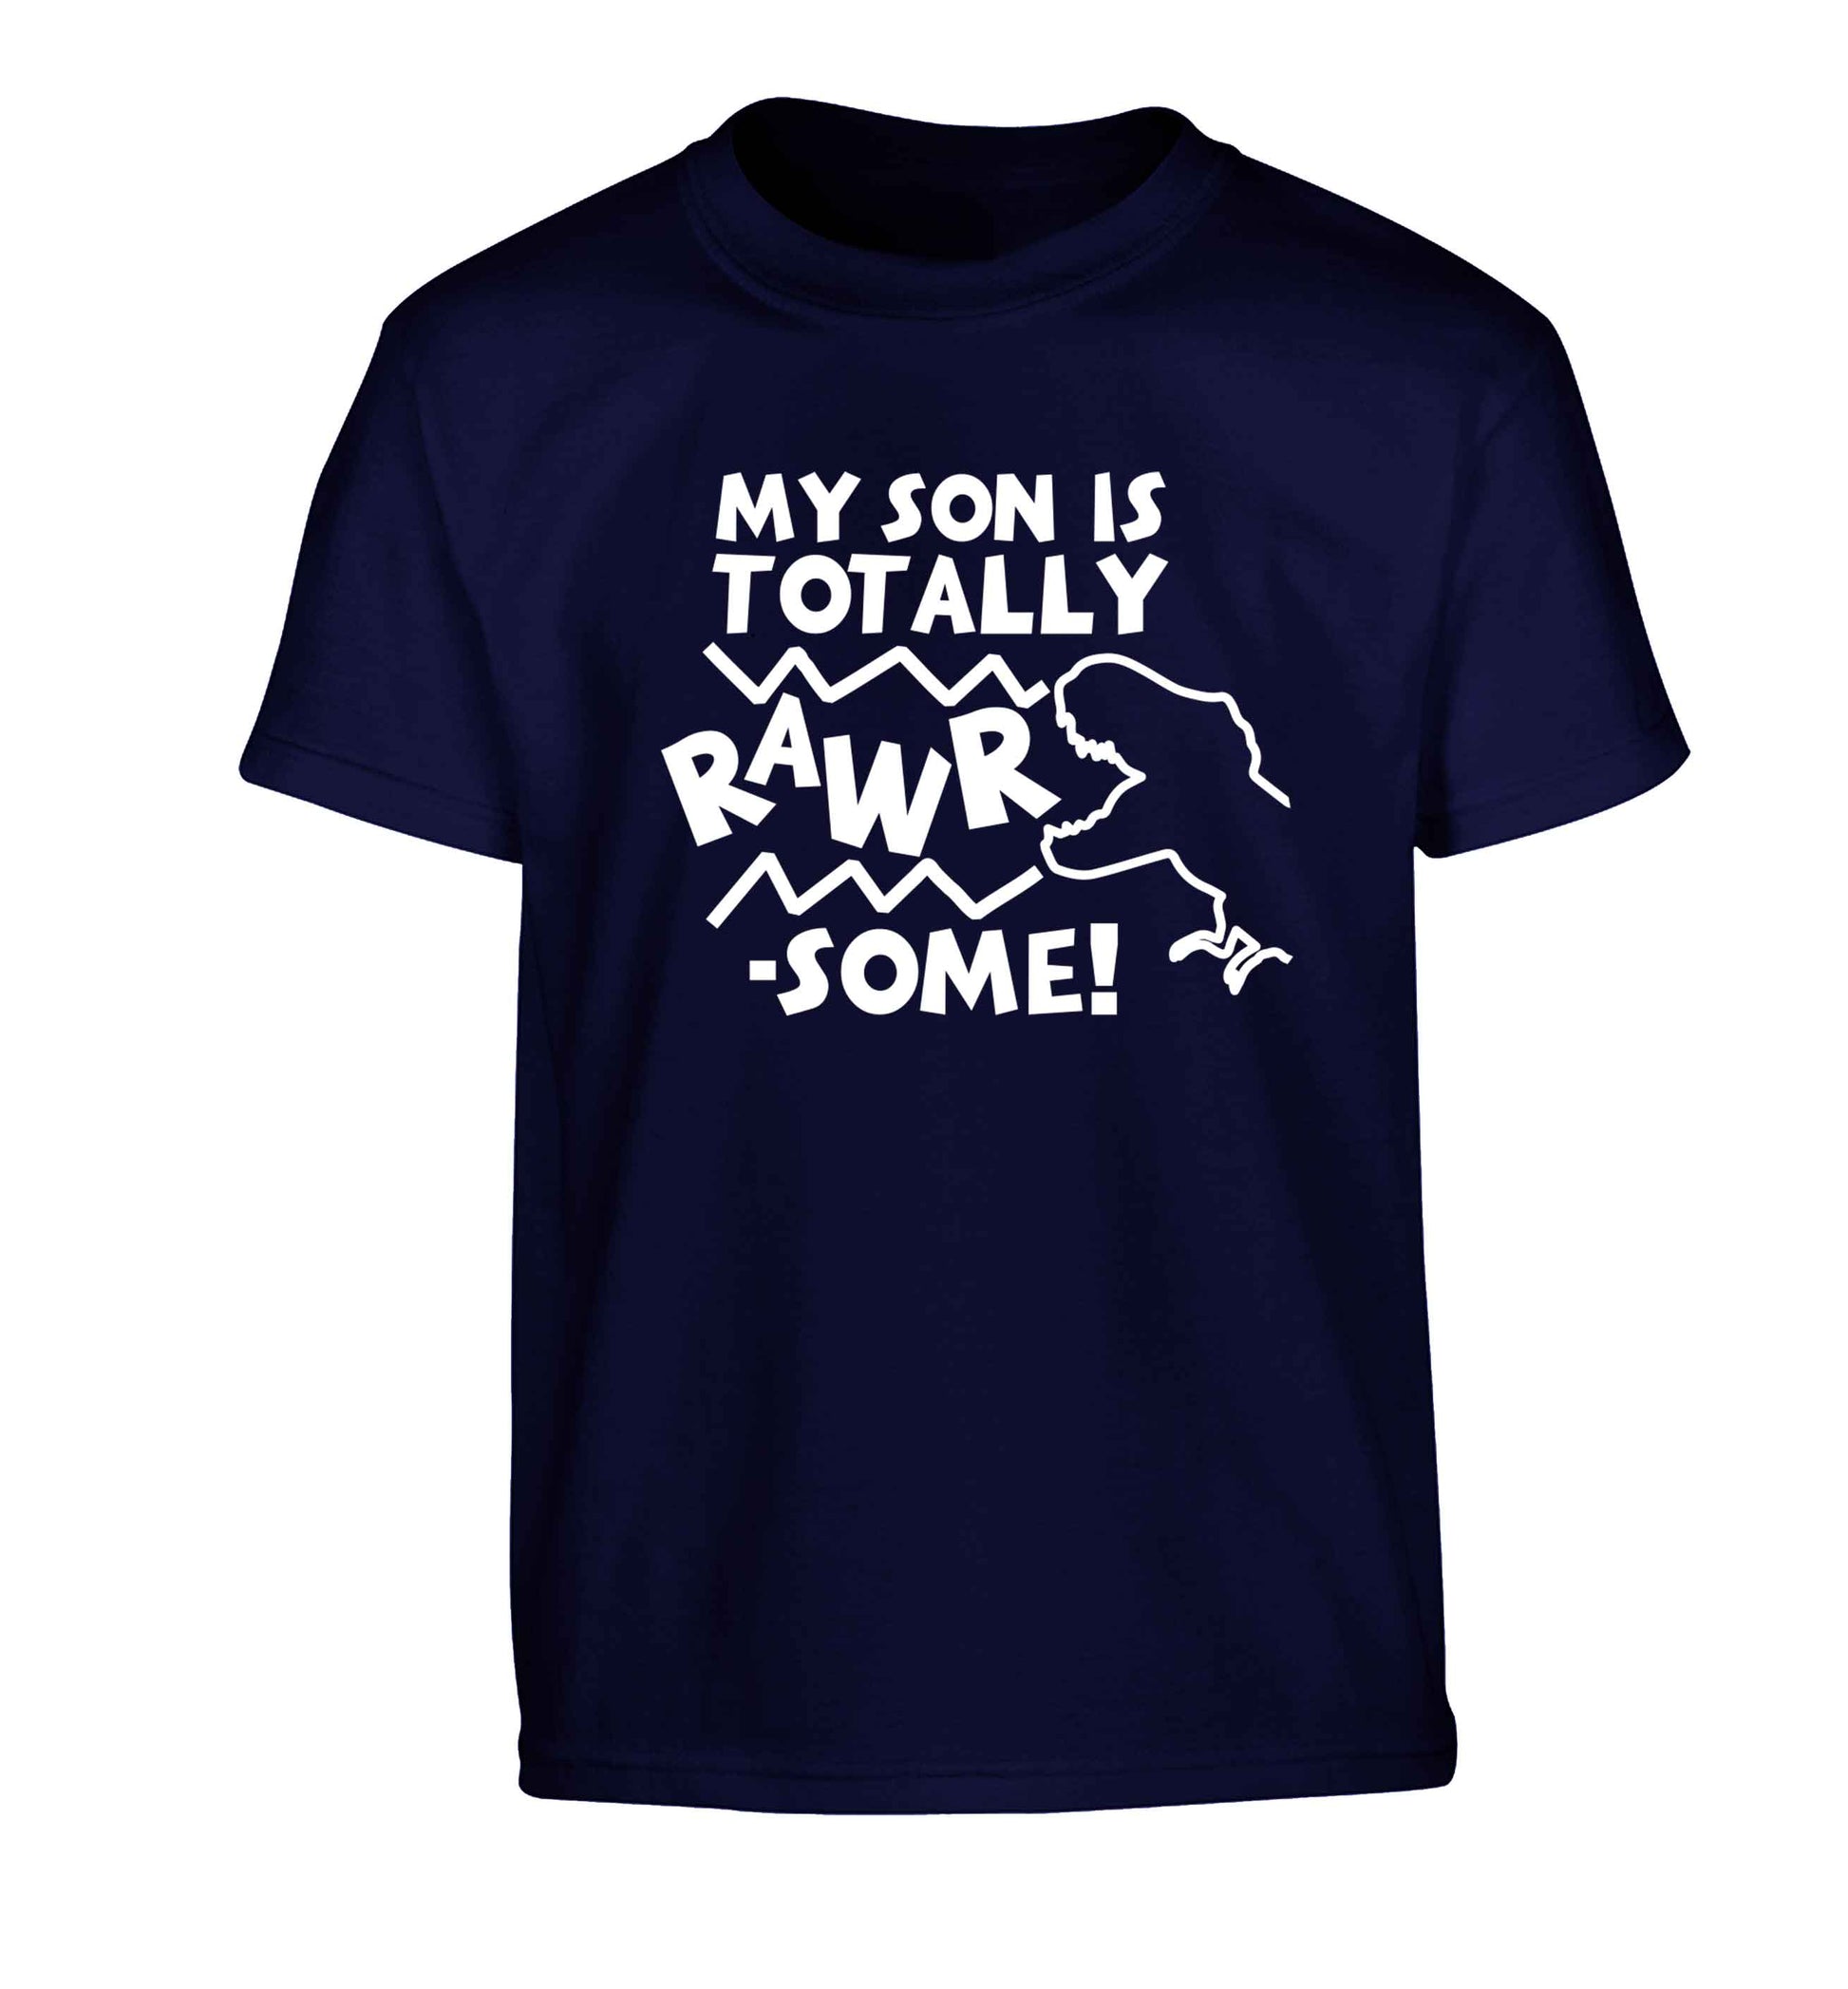 My son is totally rawrsome Children's navy Tshirt 12-13 Years